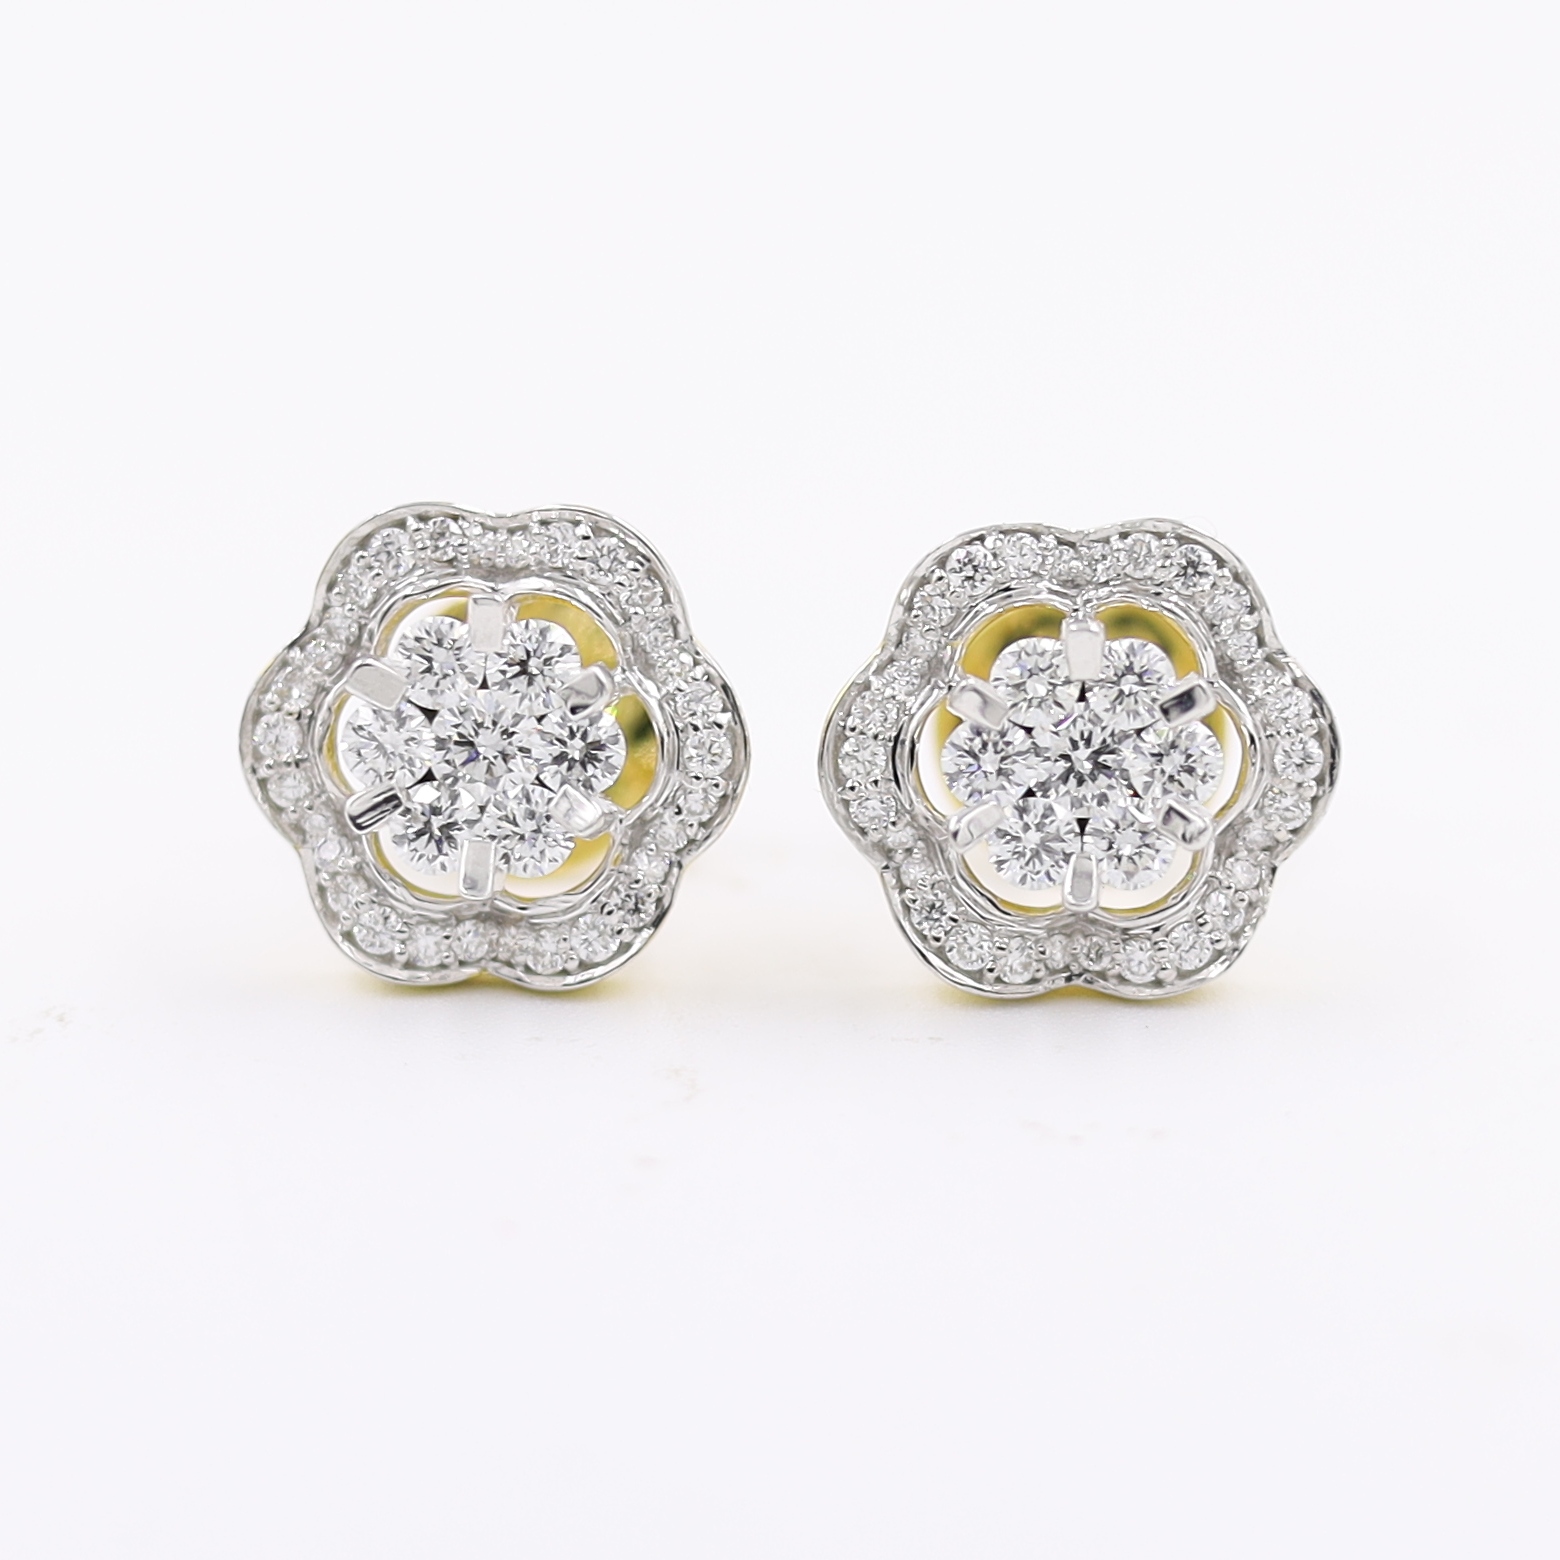 14kt Ethereal Floral Earrings topped with a round pressure-set diamond.